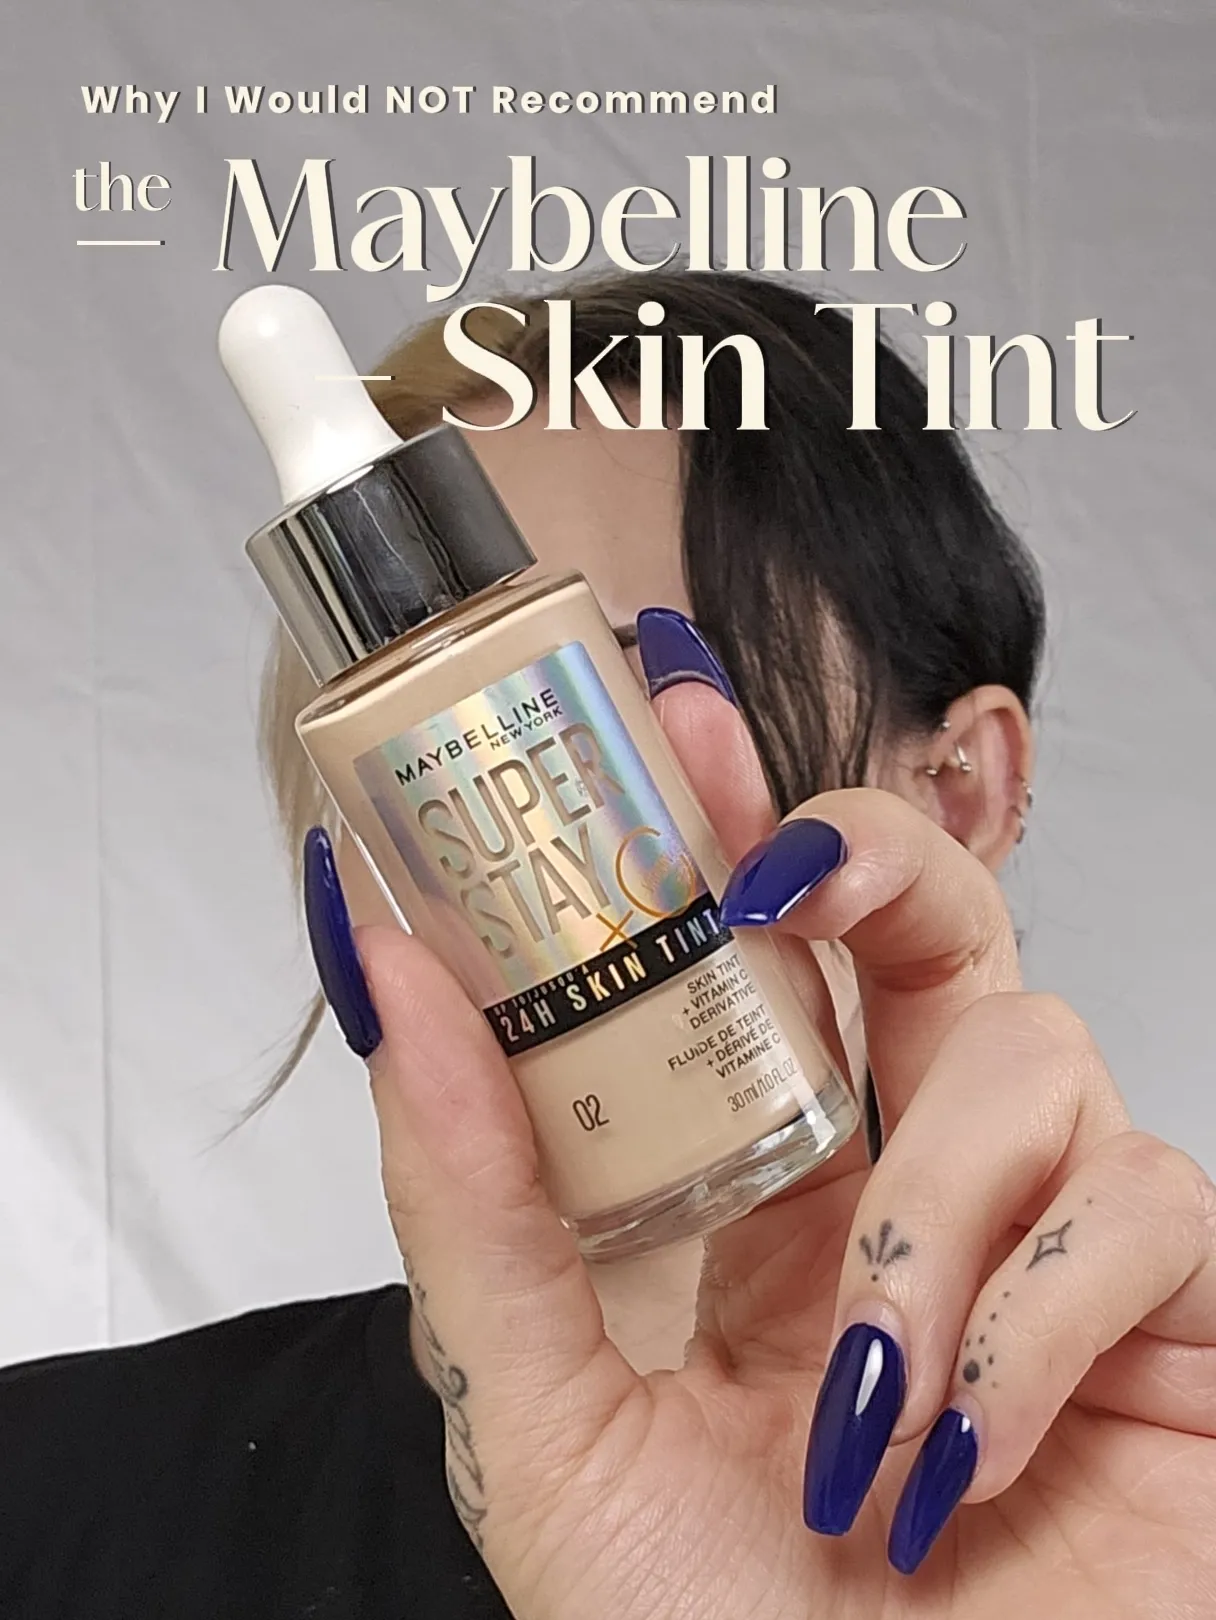 Maybelline 2024 Skin Super ideas looks in Stay Makeup top with Tint 19